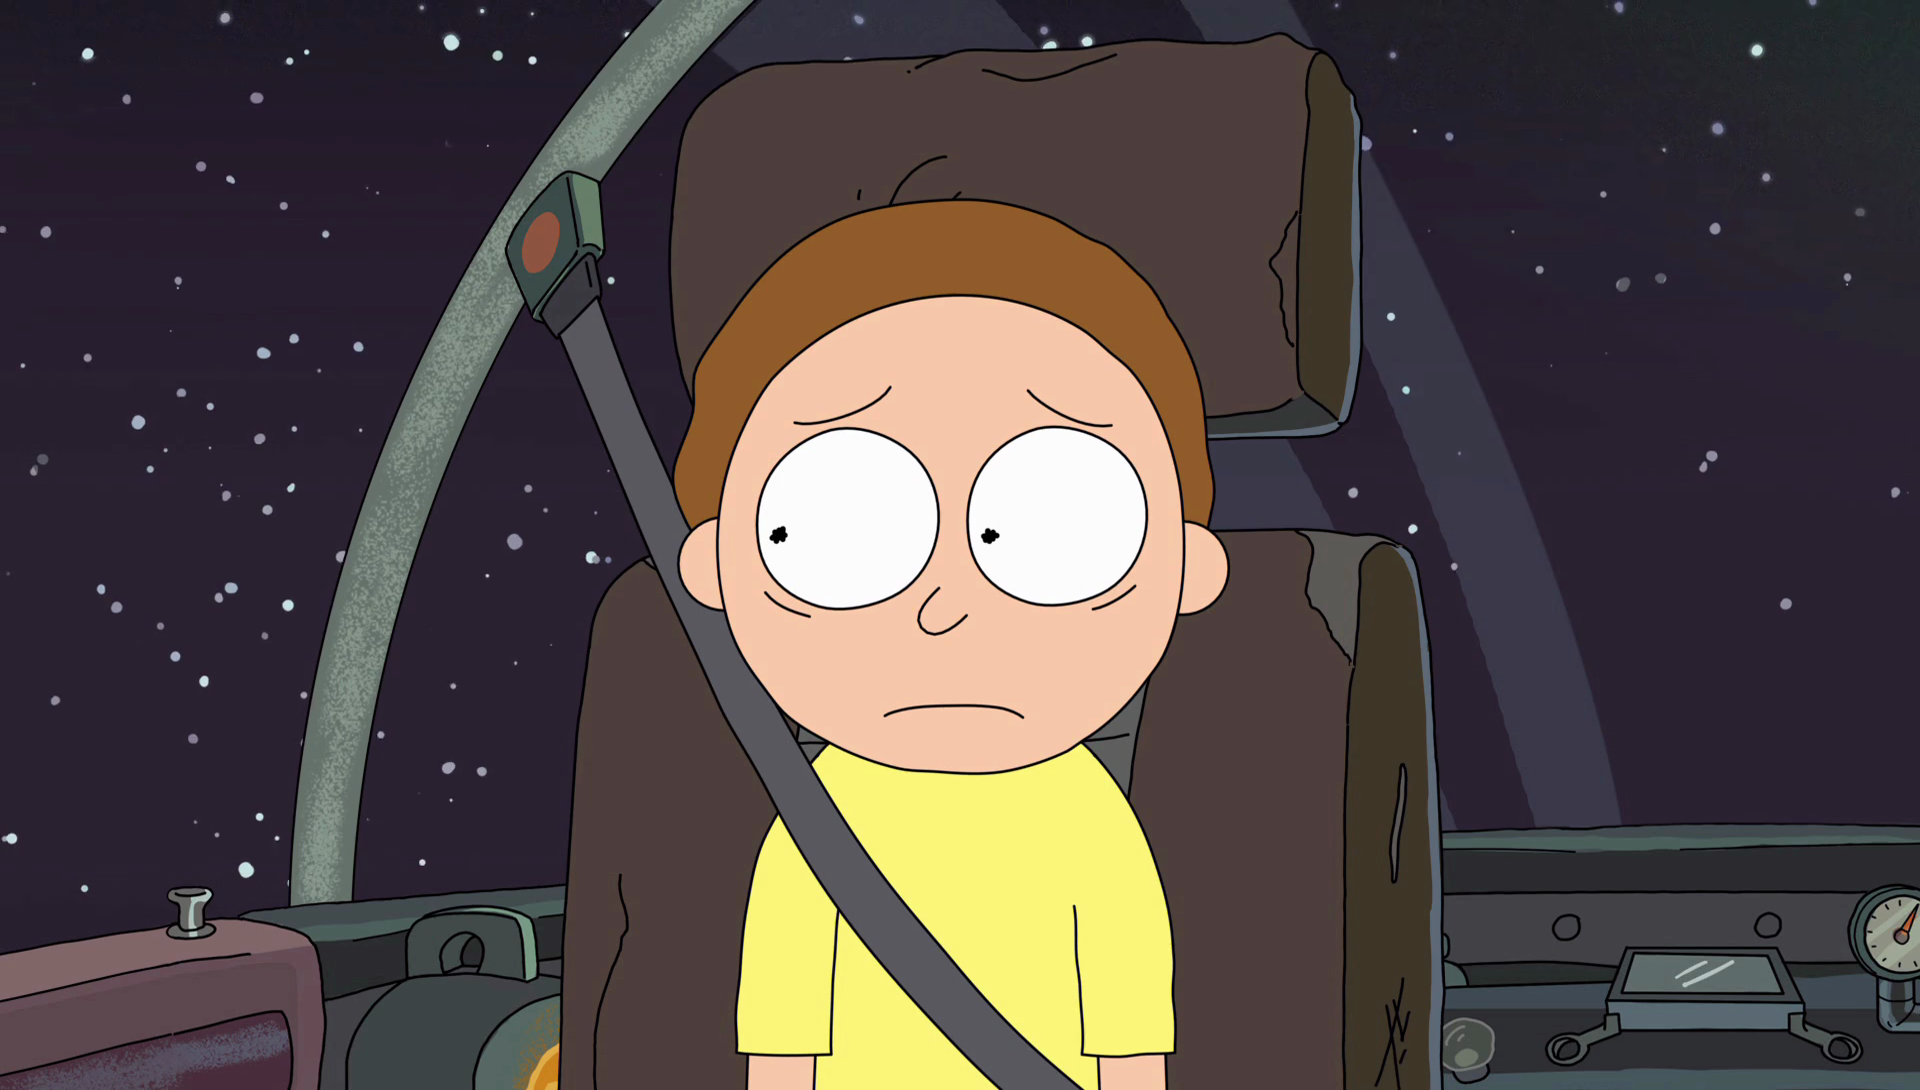 Image - S2e2 morty still sad.png | Rick and Morty Wiki | FANDOM powered ...